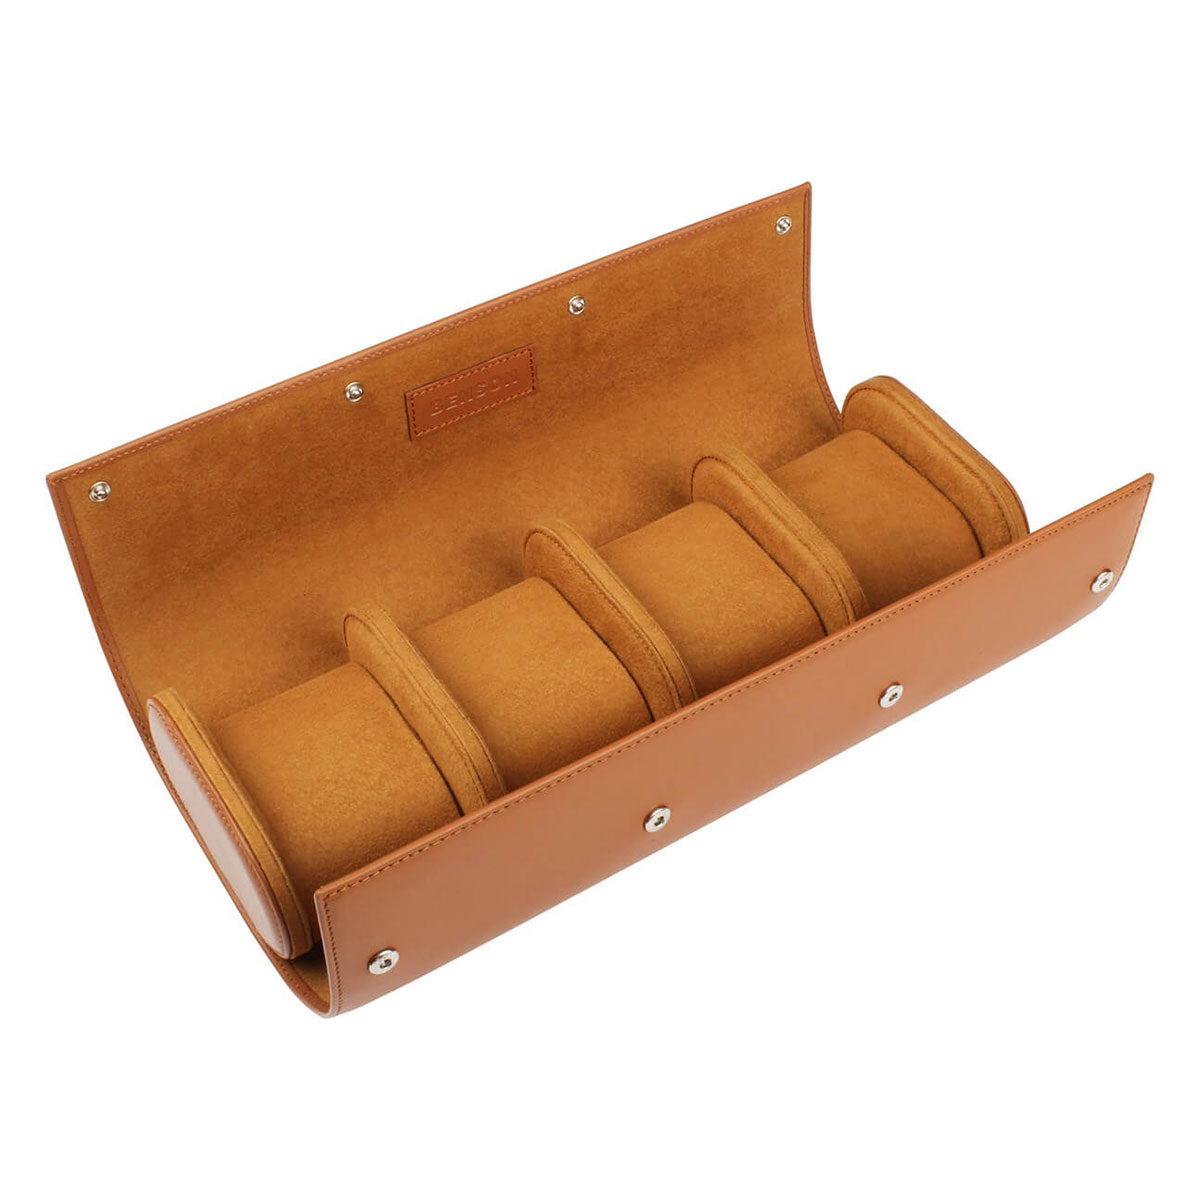 Leather Watch Roll Case for 4 Watches